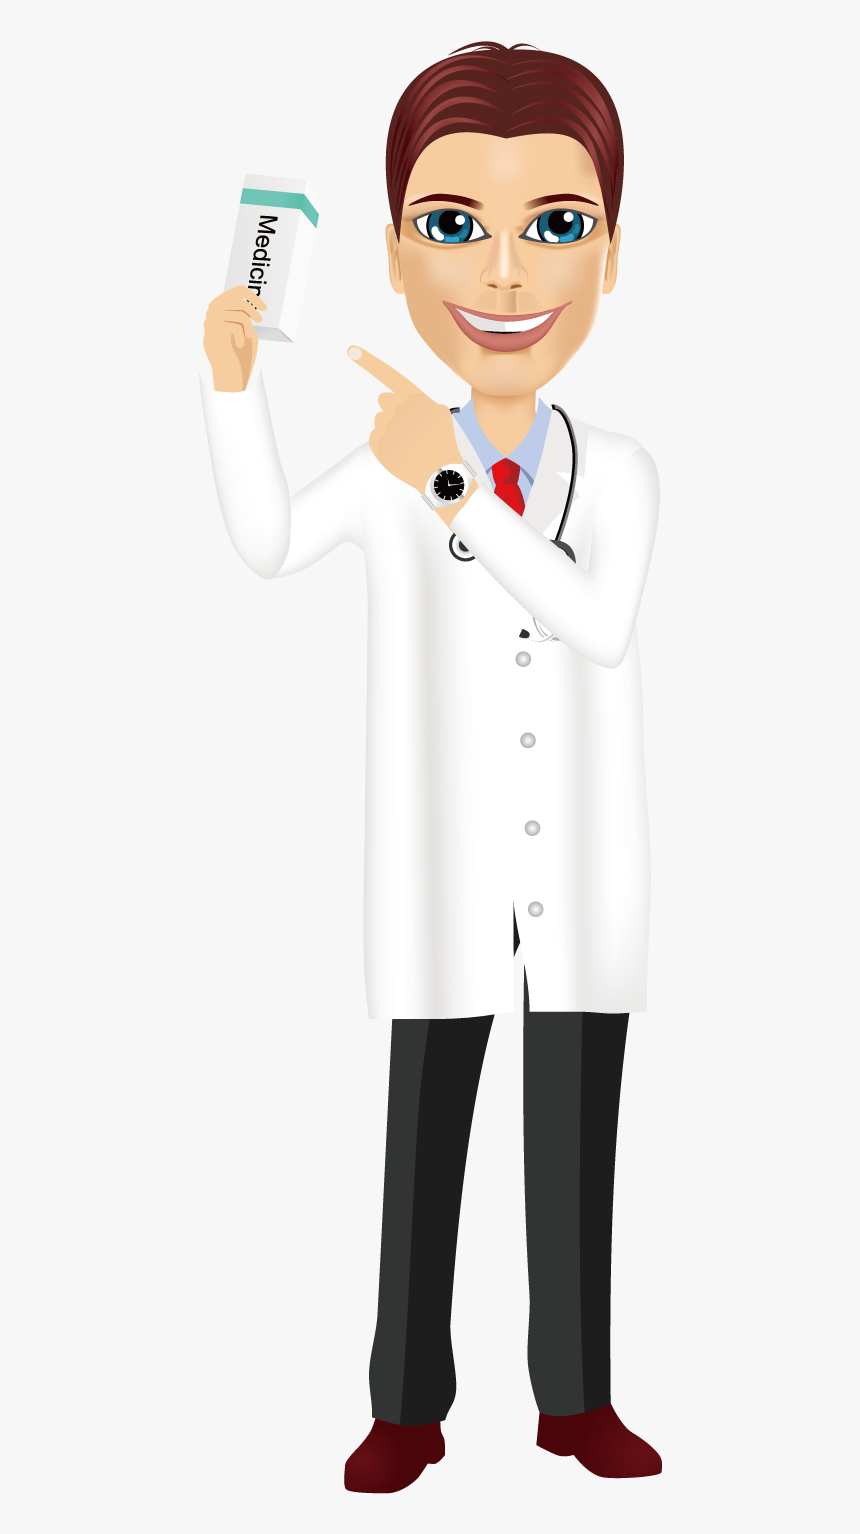 Female Doctor Drawing: Over 11,299 Royalty-Free Licensable Stock  Illustrations & Drawings | Shutterstock